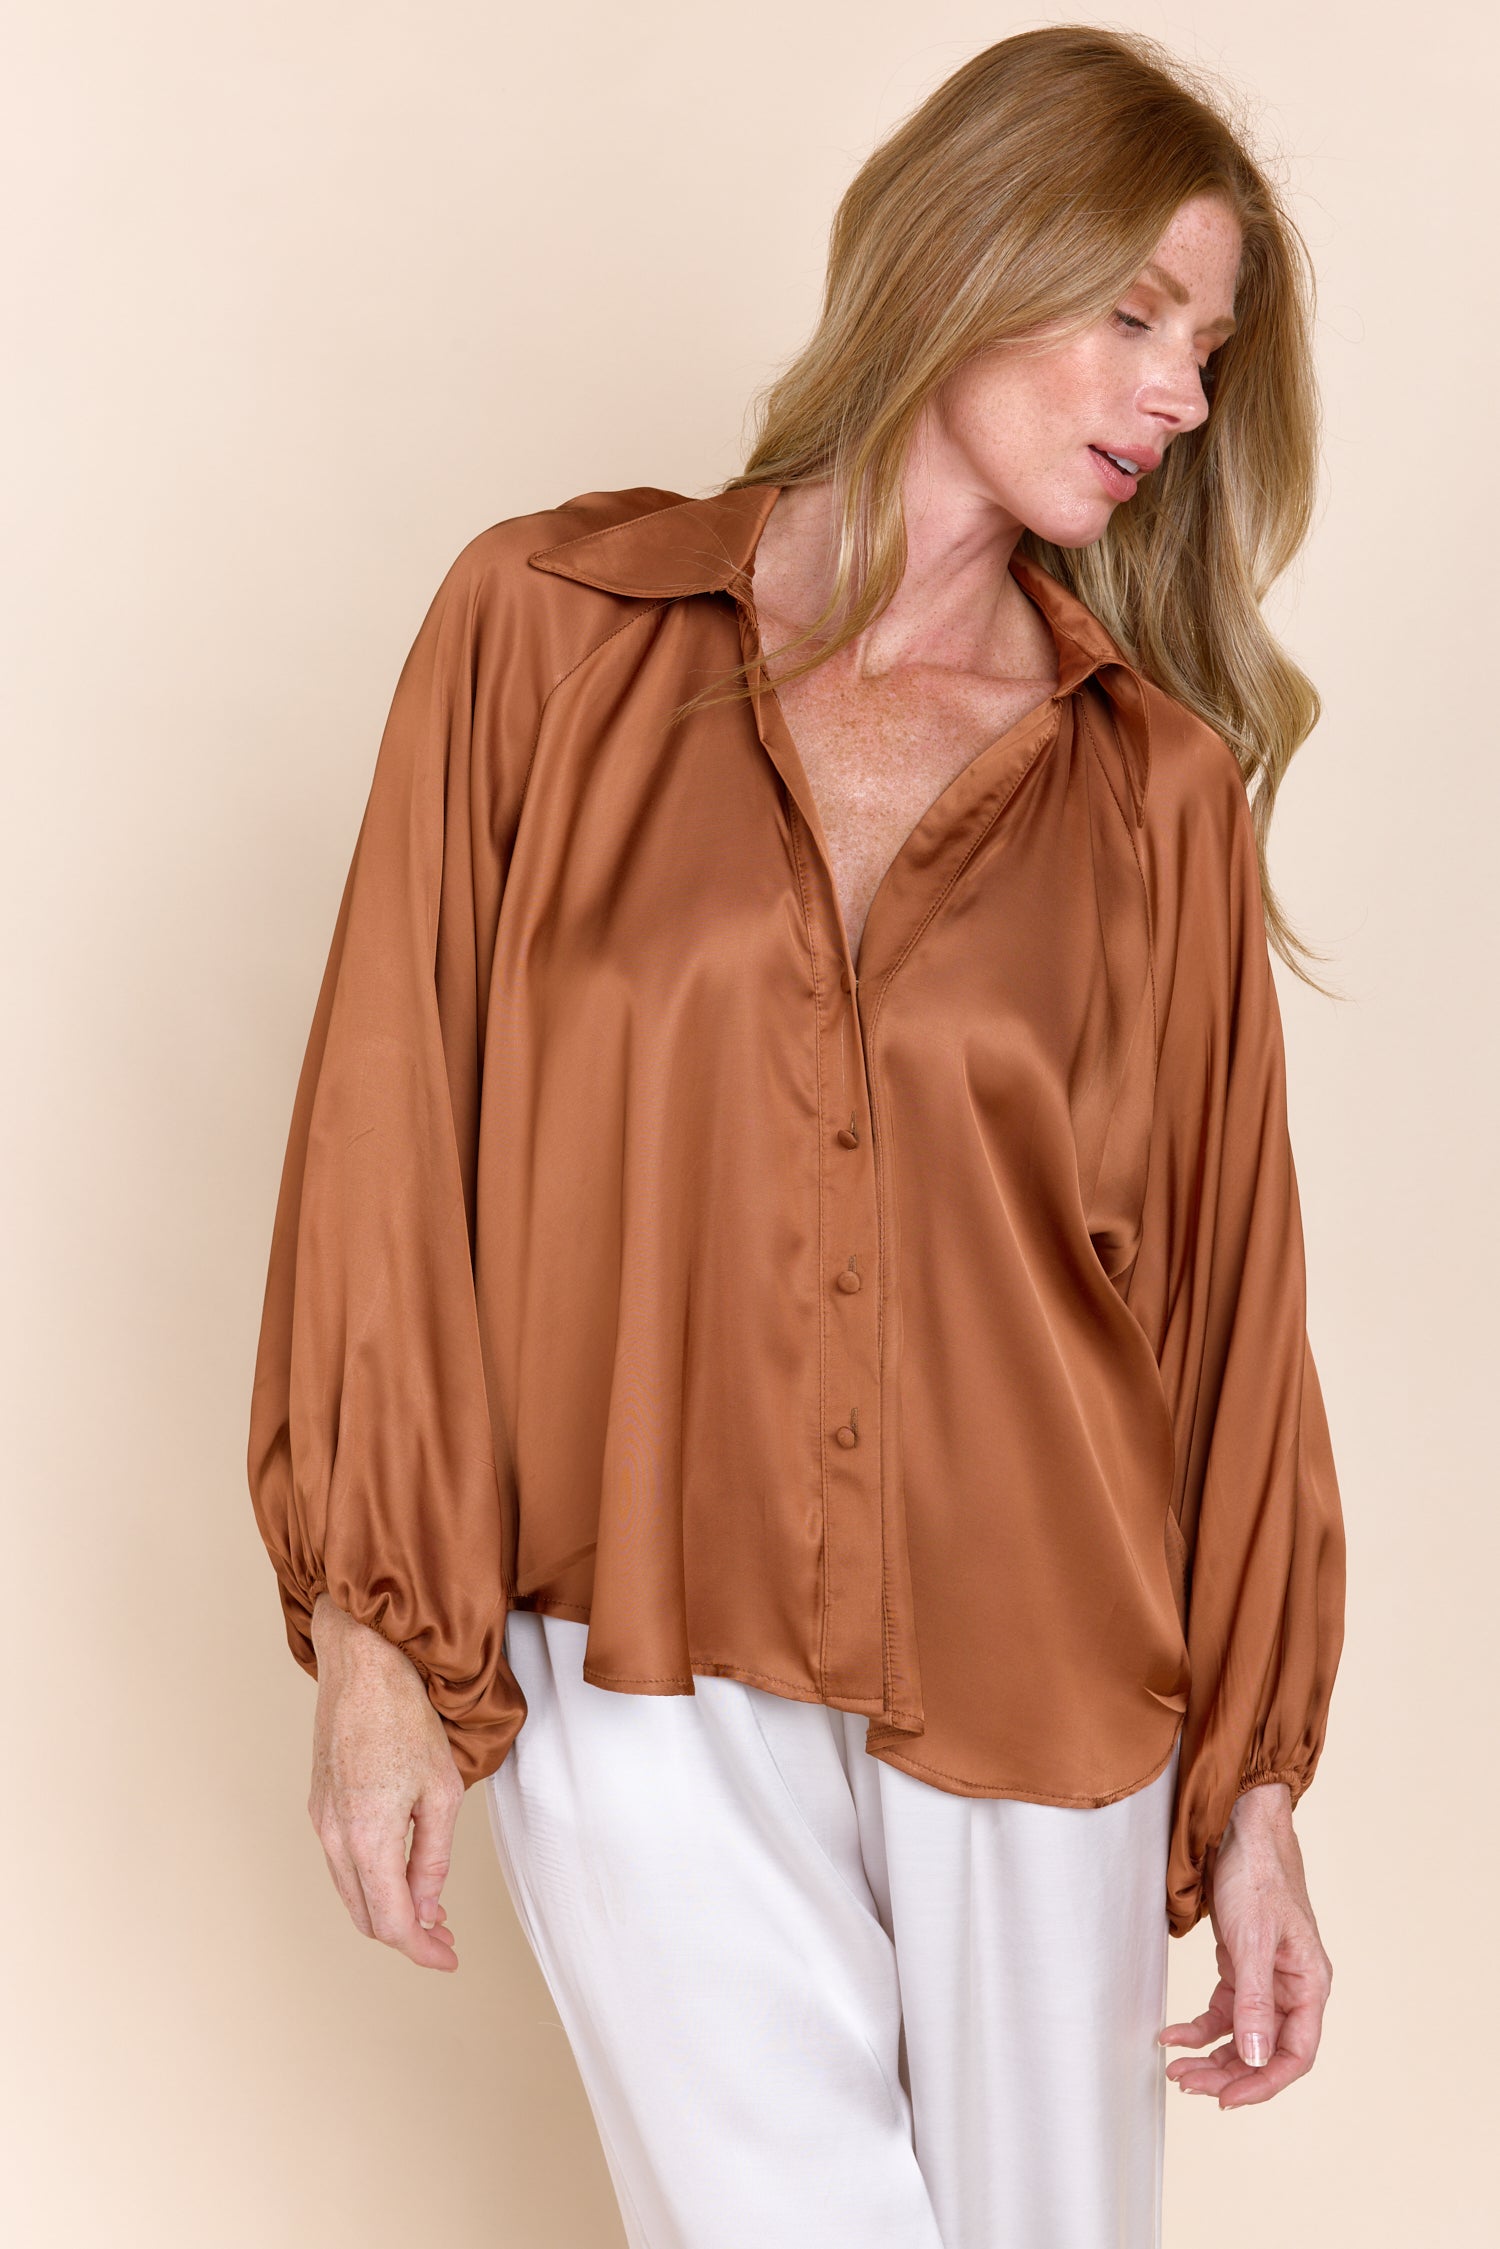 MONTREAL | Tops | Blouse, Satin, Satin and Silk Tops, SOLIDS, Tops | shop-sofia